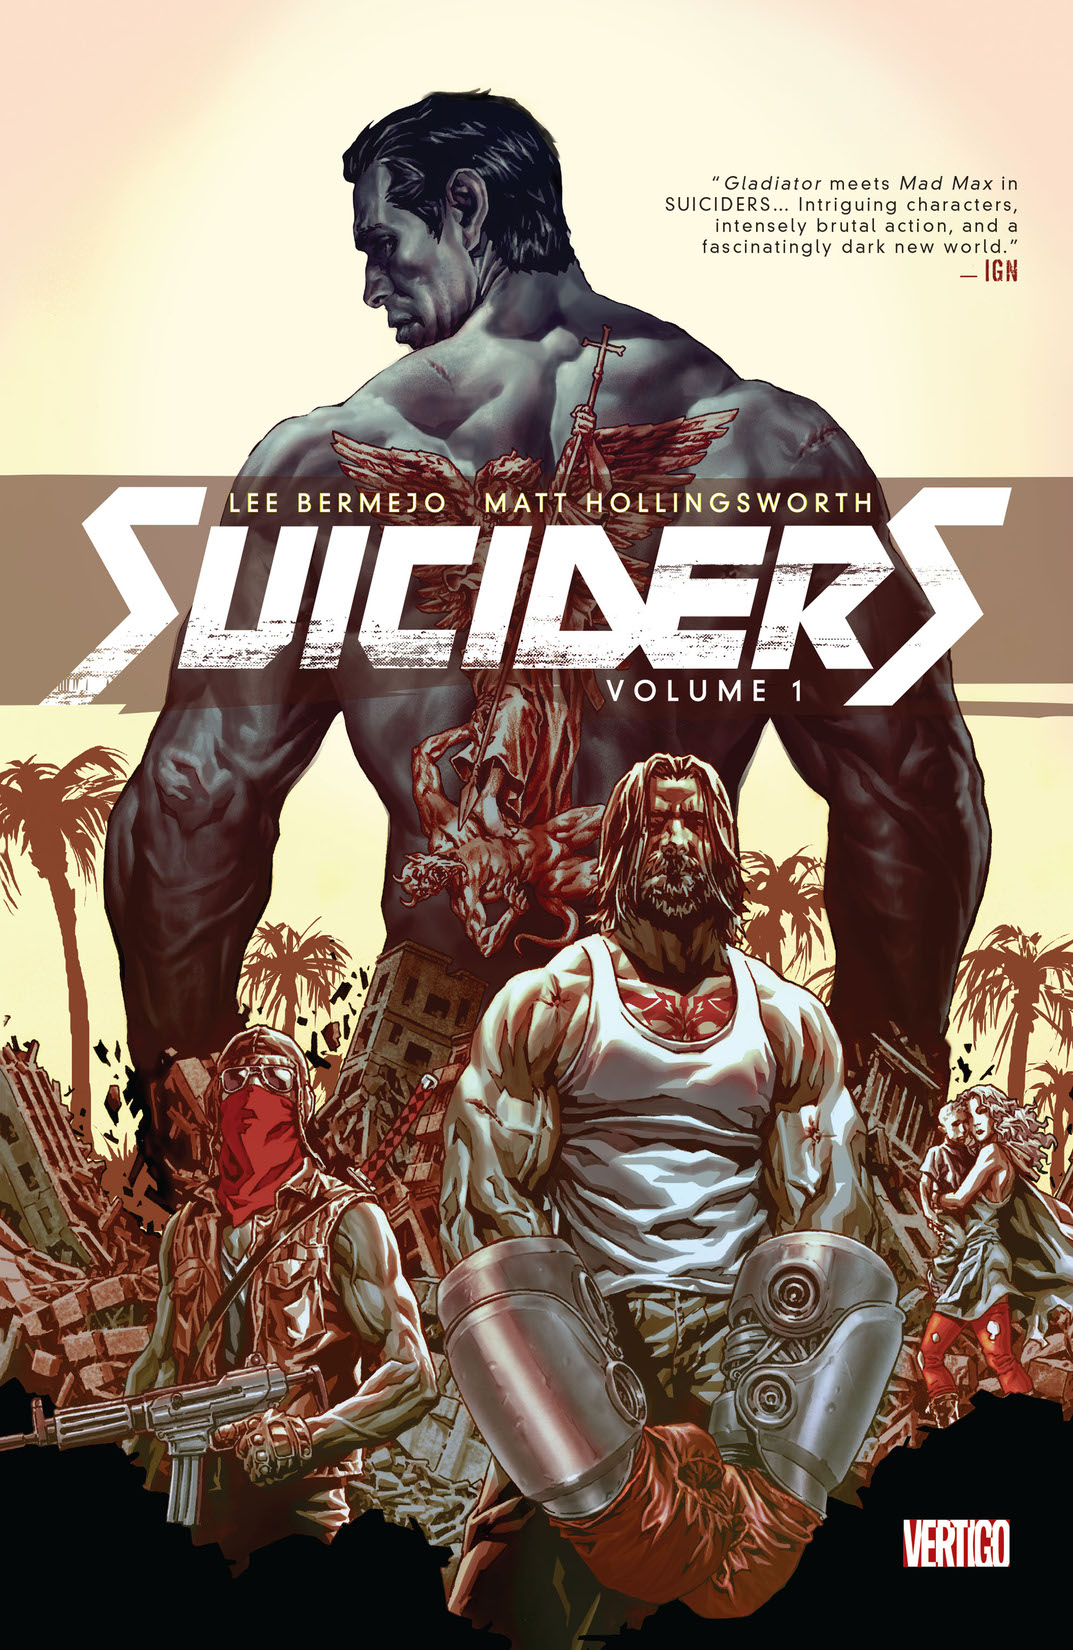 Suiciders Vol. 1 preview images